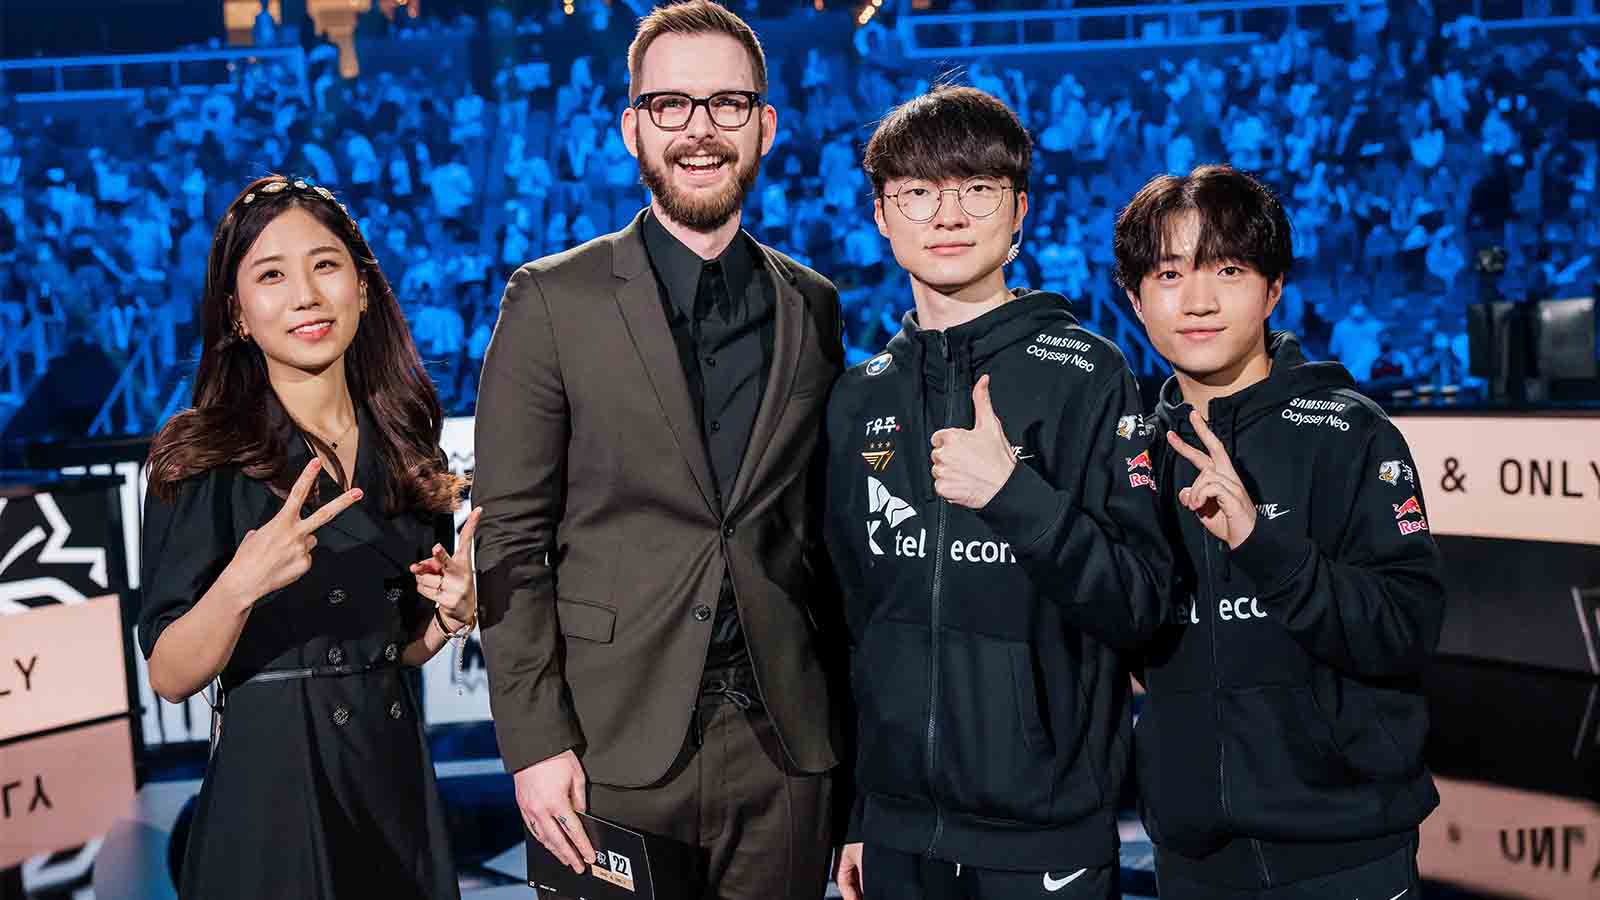 Faker the best LoL Player